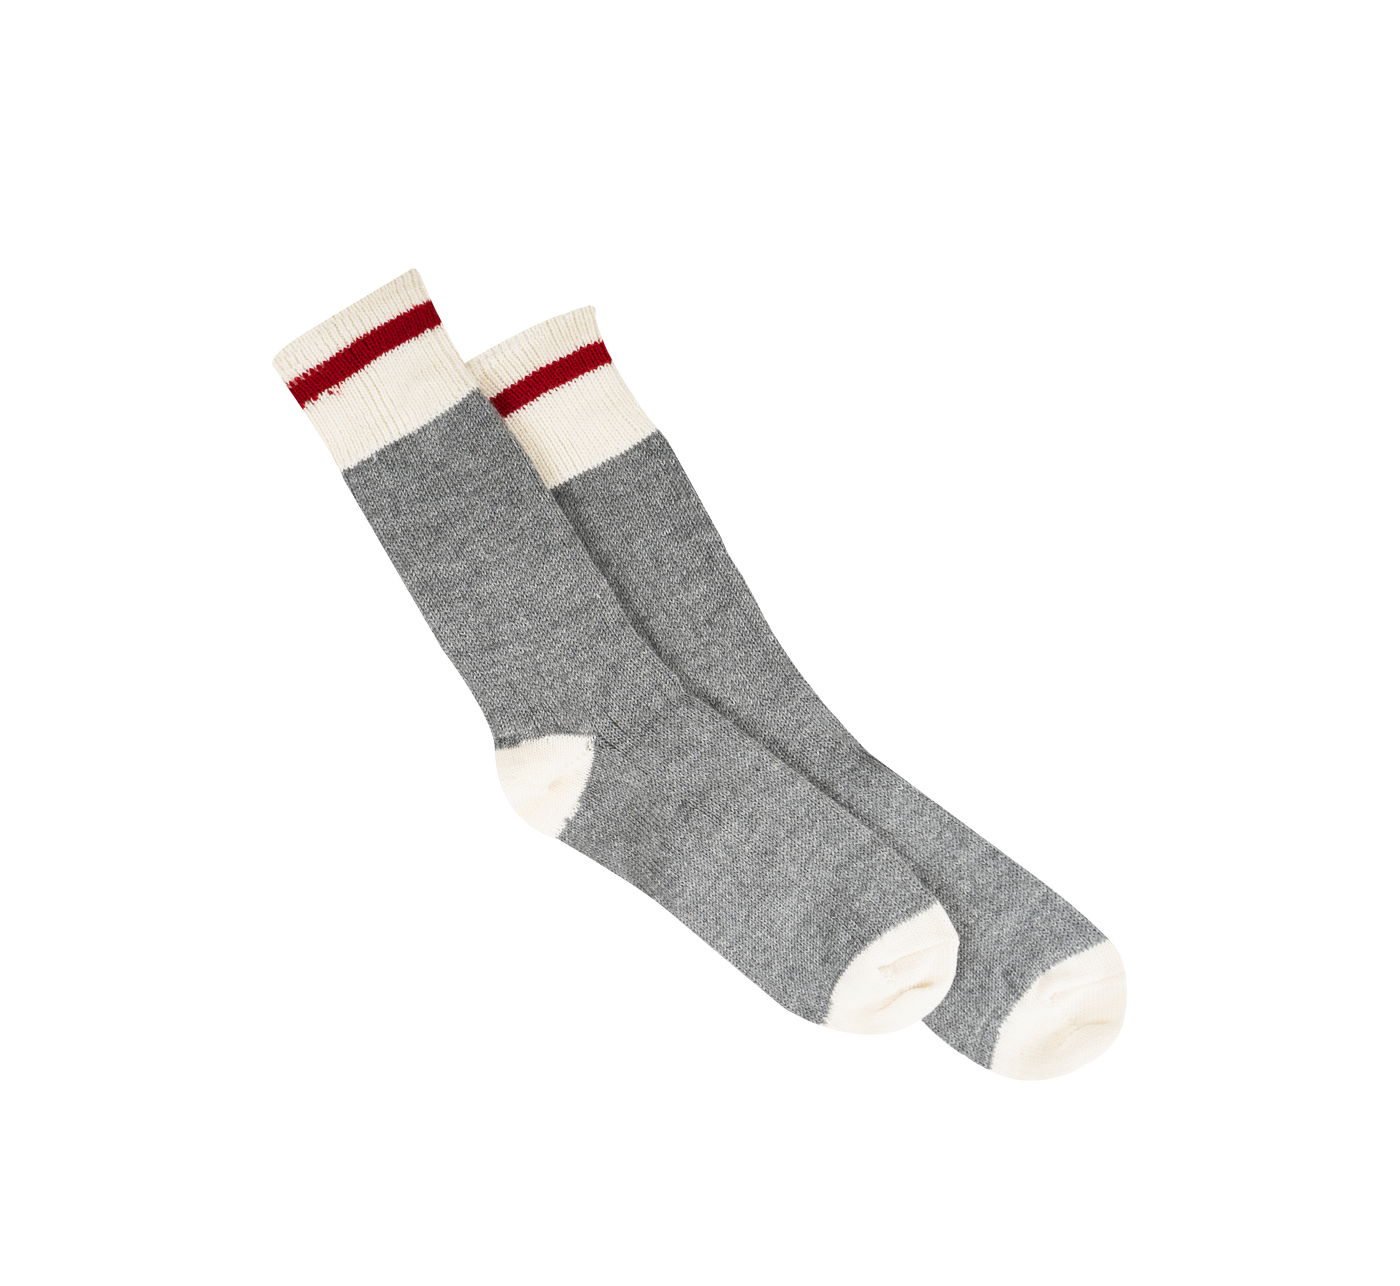 The Made in Canada Giving Socks - Red Stripe 🇨🇦 - Local Laundry